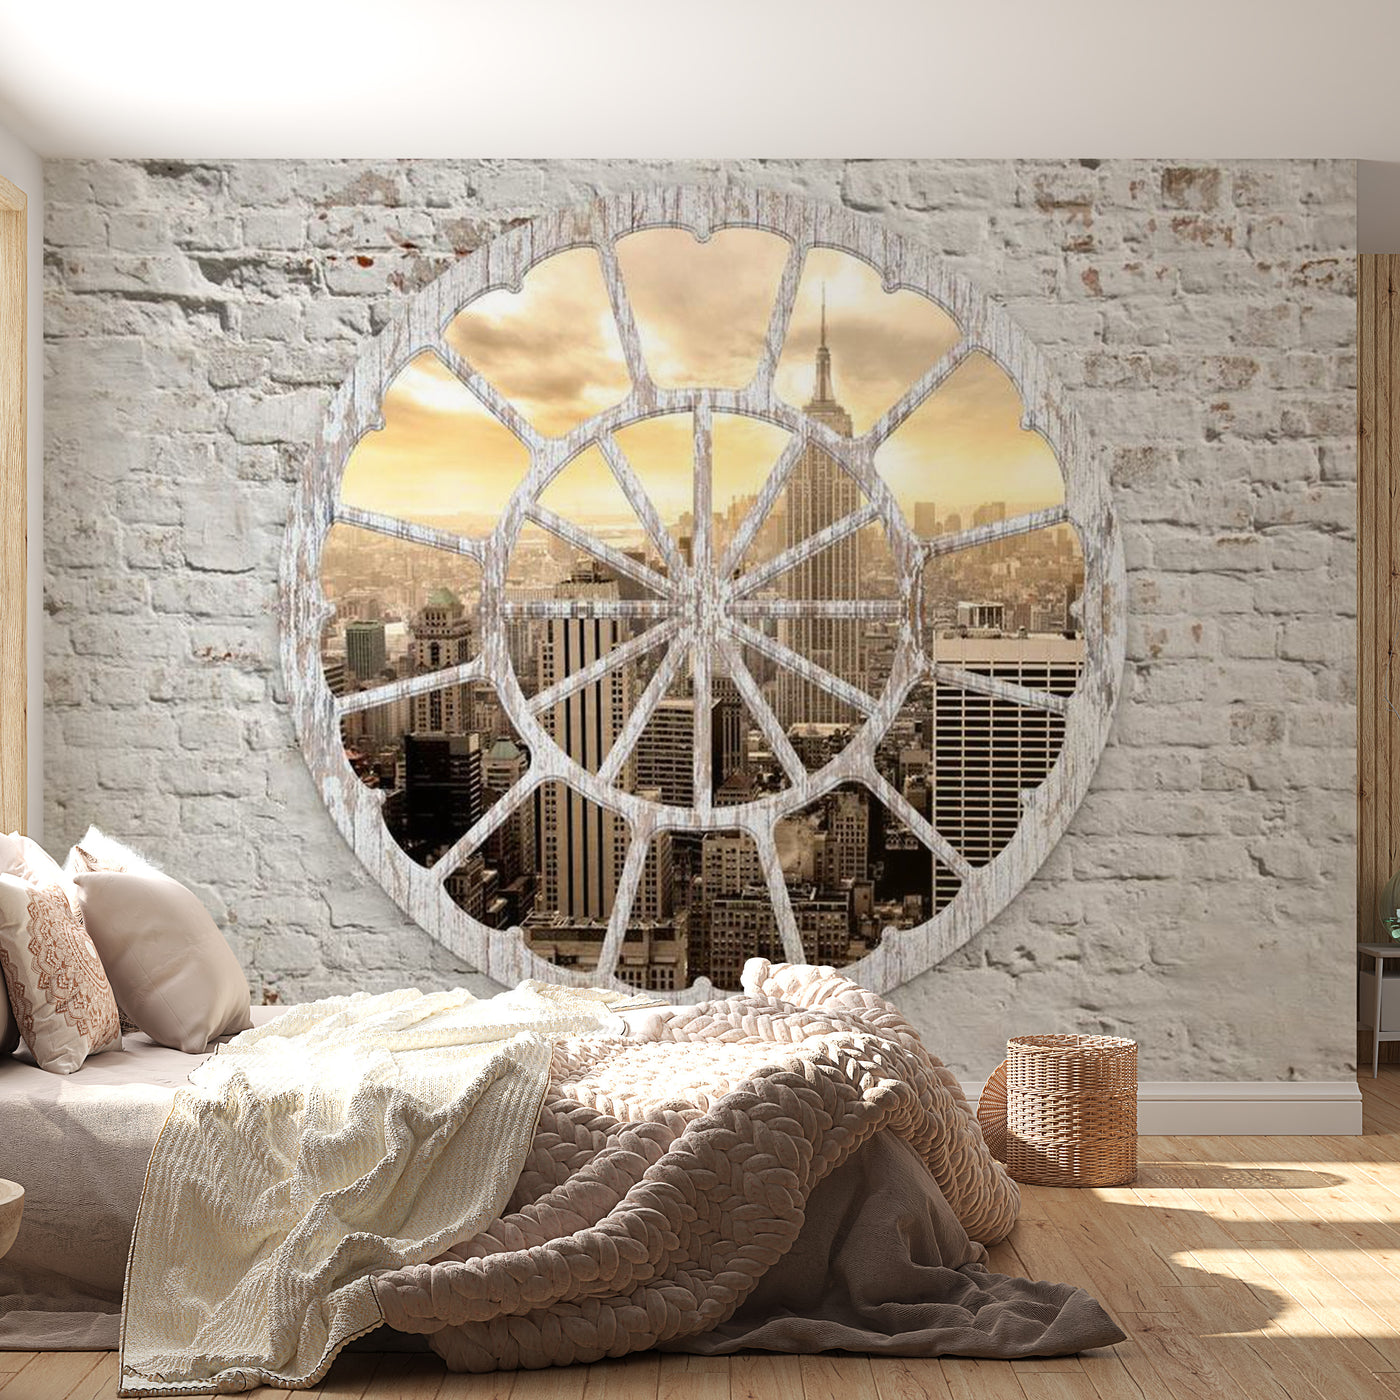 Peel & Stick Wall Mural - New York View Round Window - Removable Wall Decals